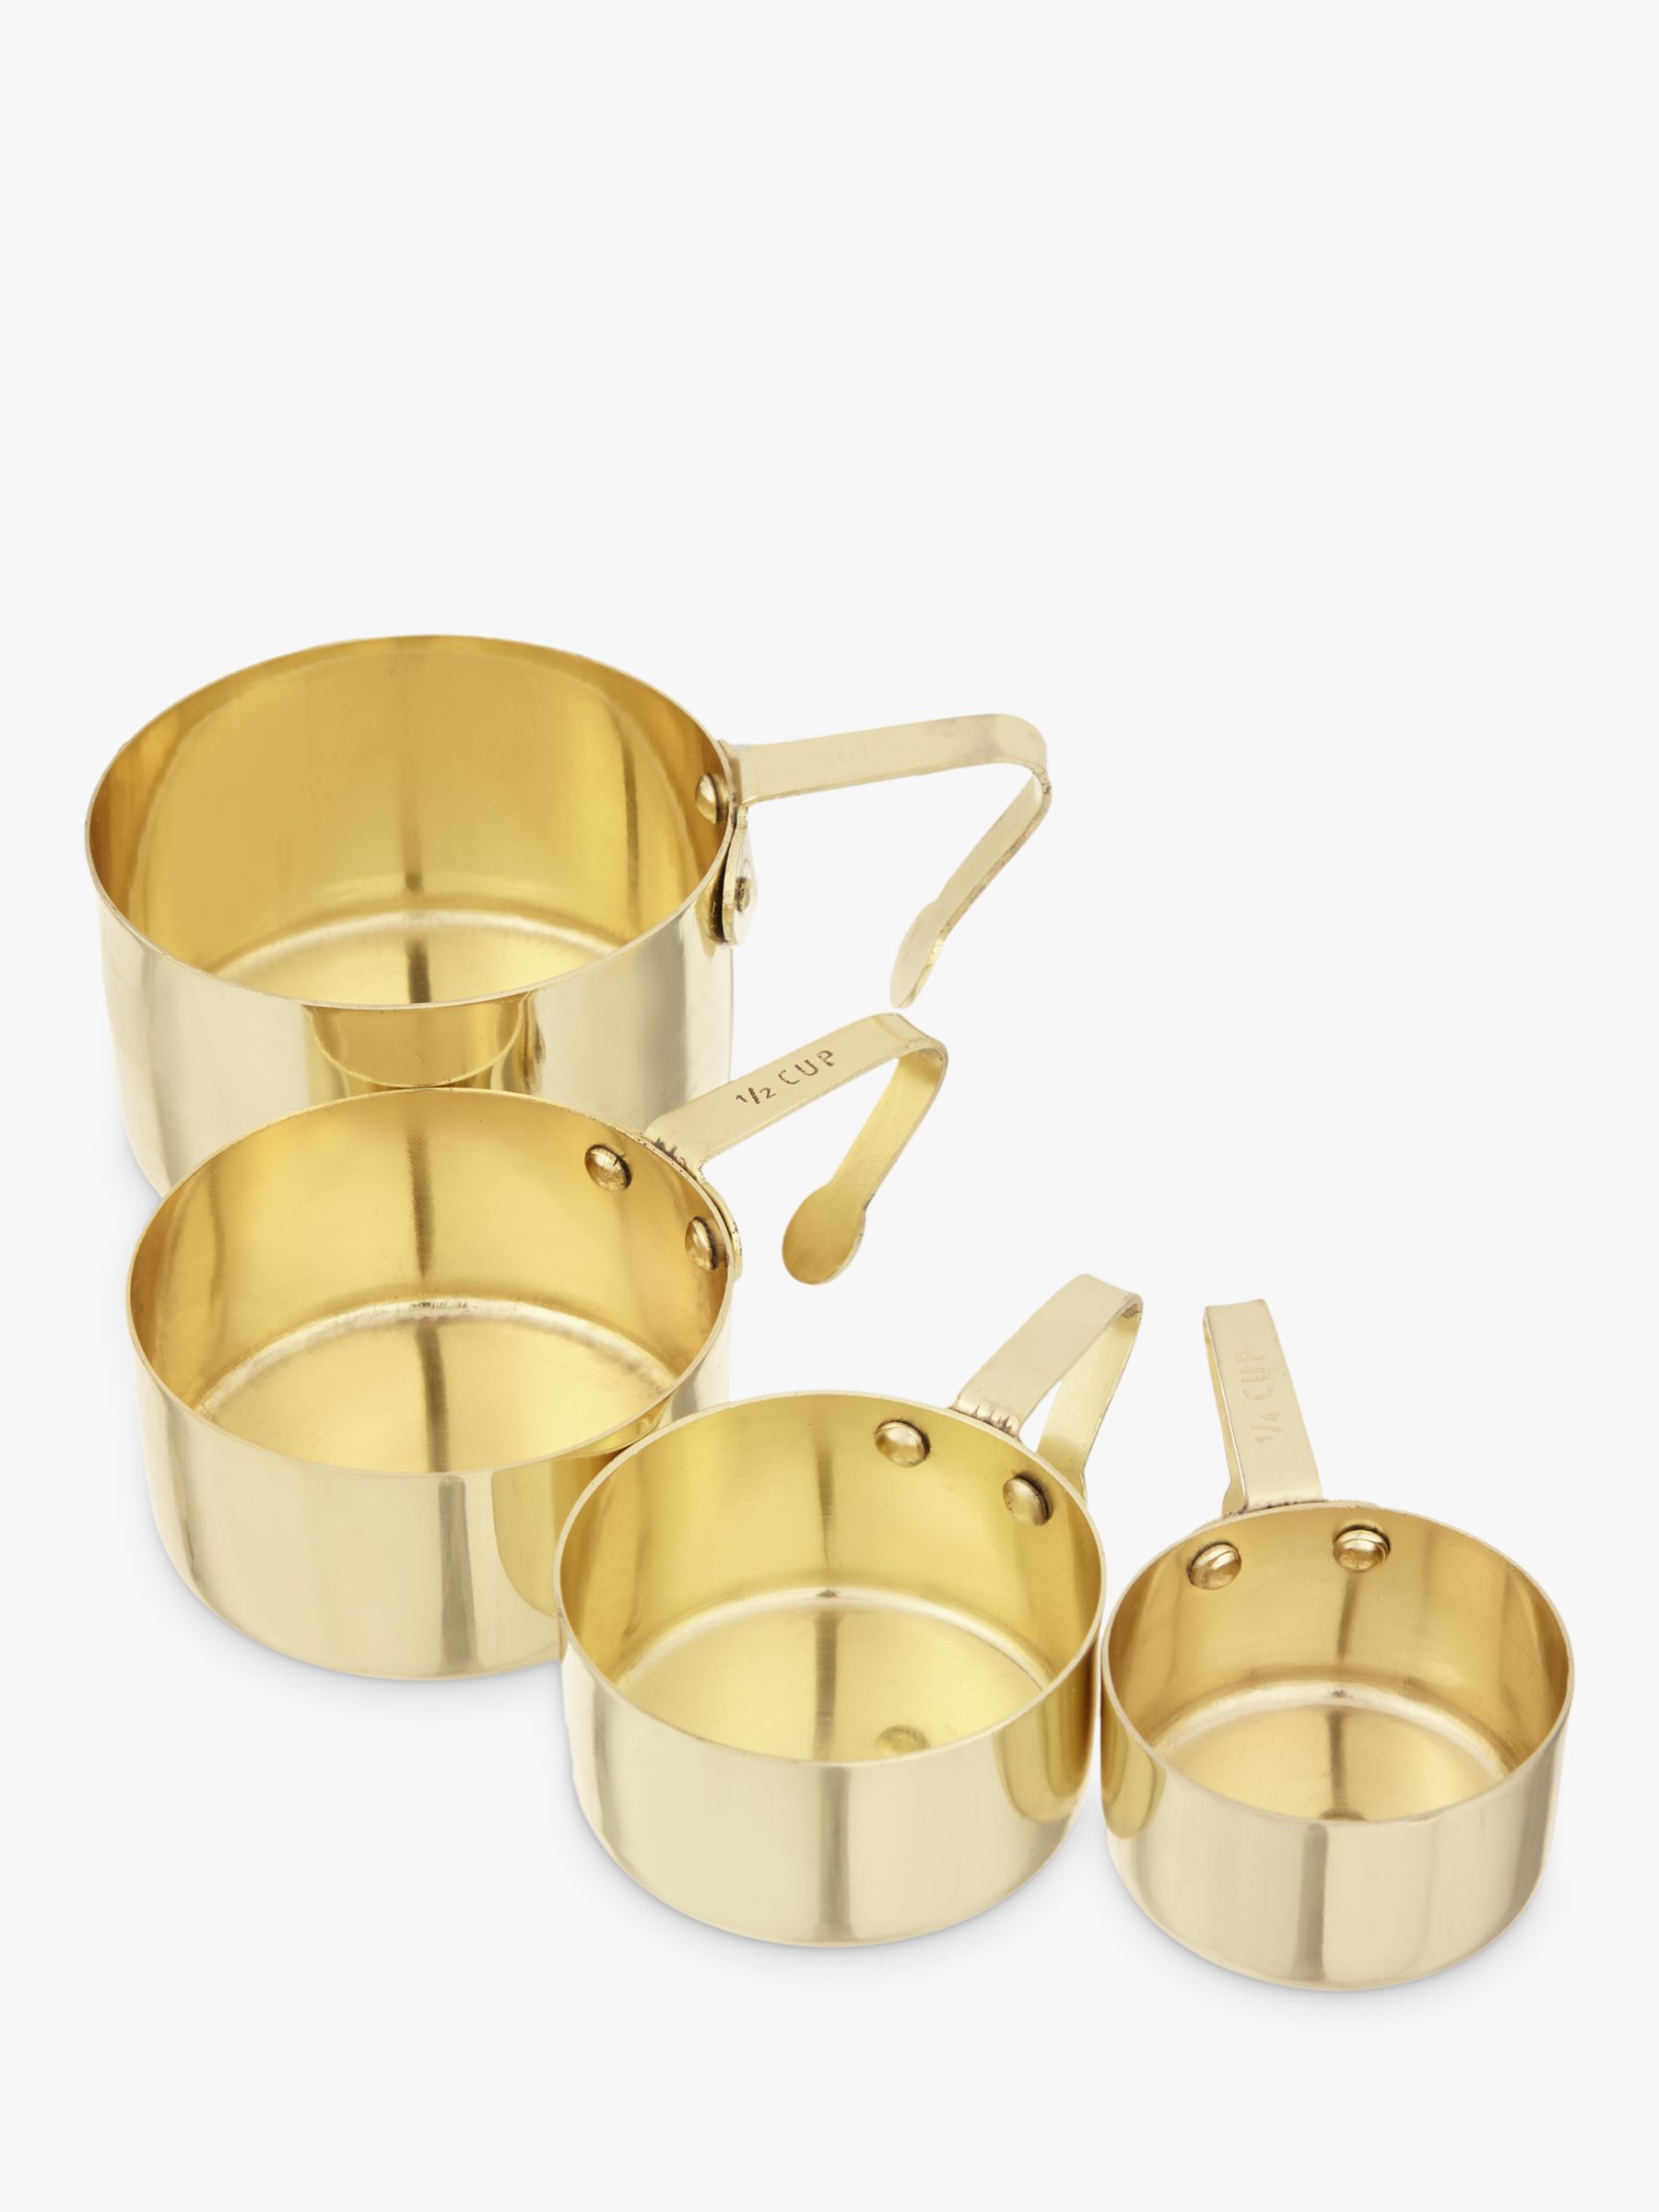 Anthropologie Brass Measuring Cups, Set of 4, Gold